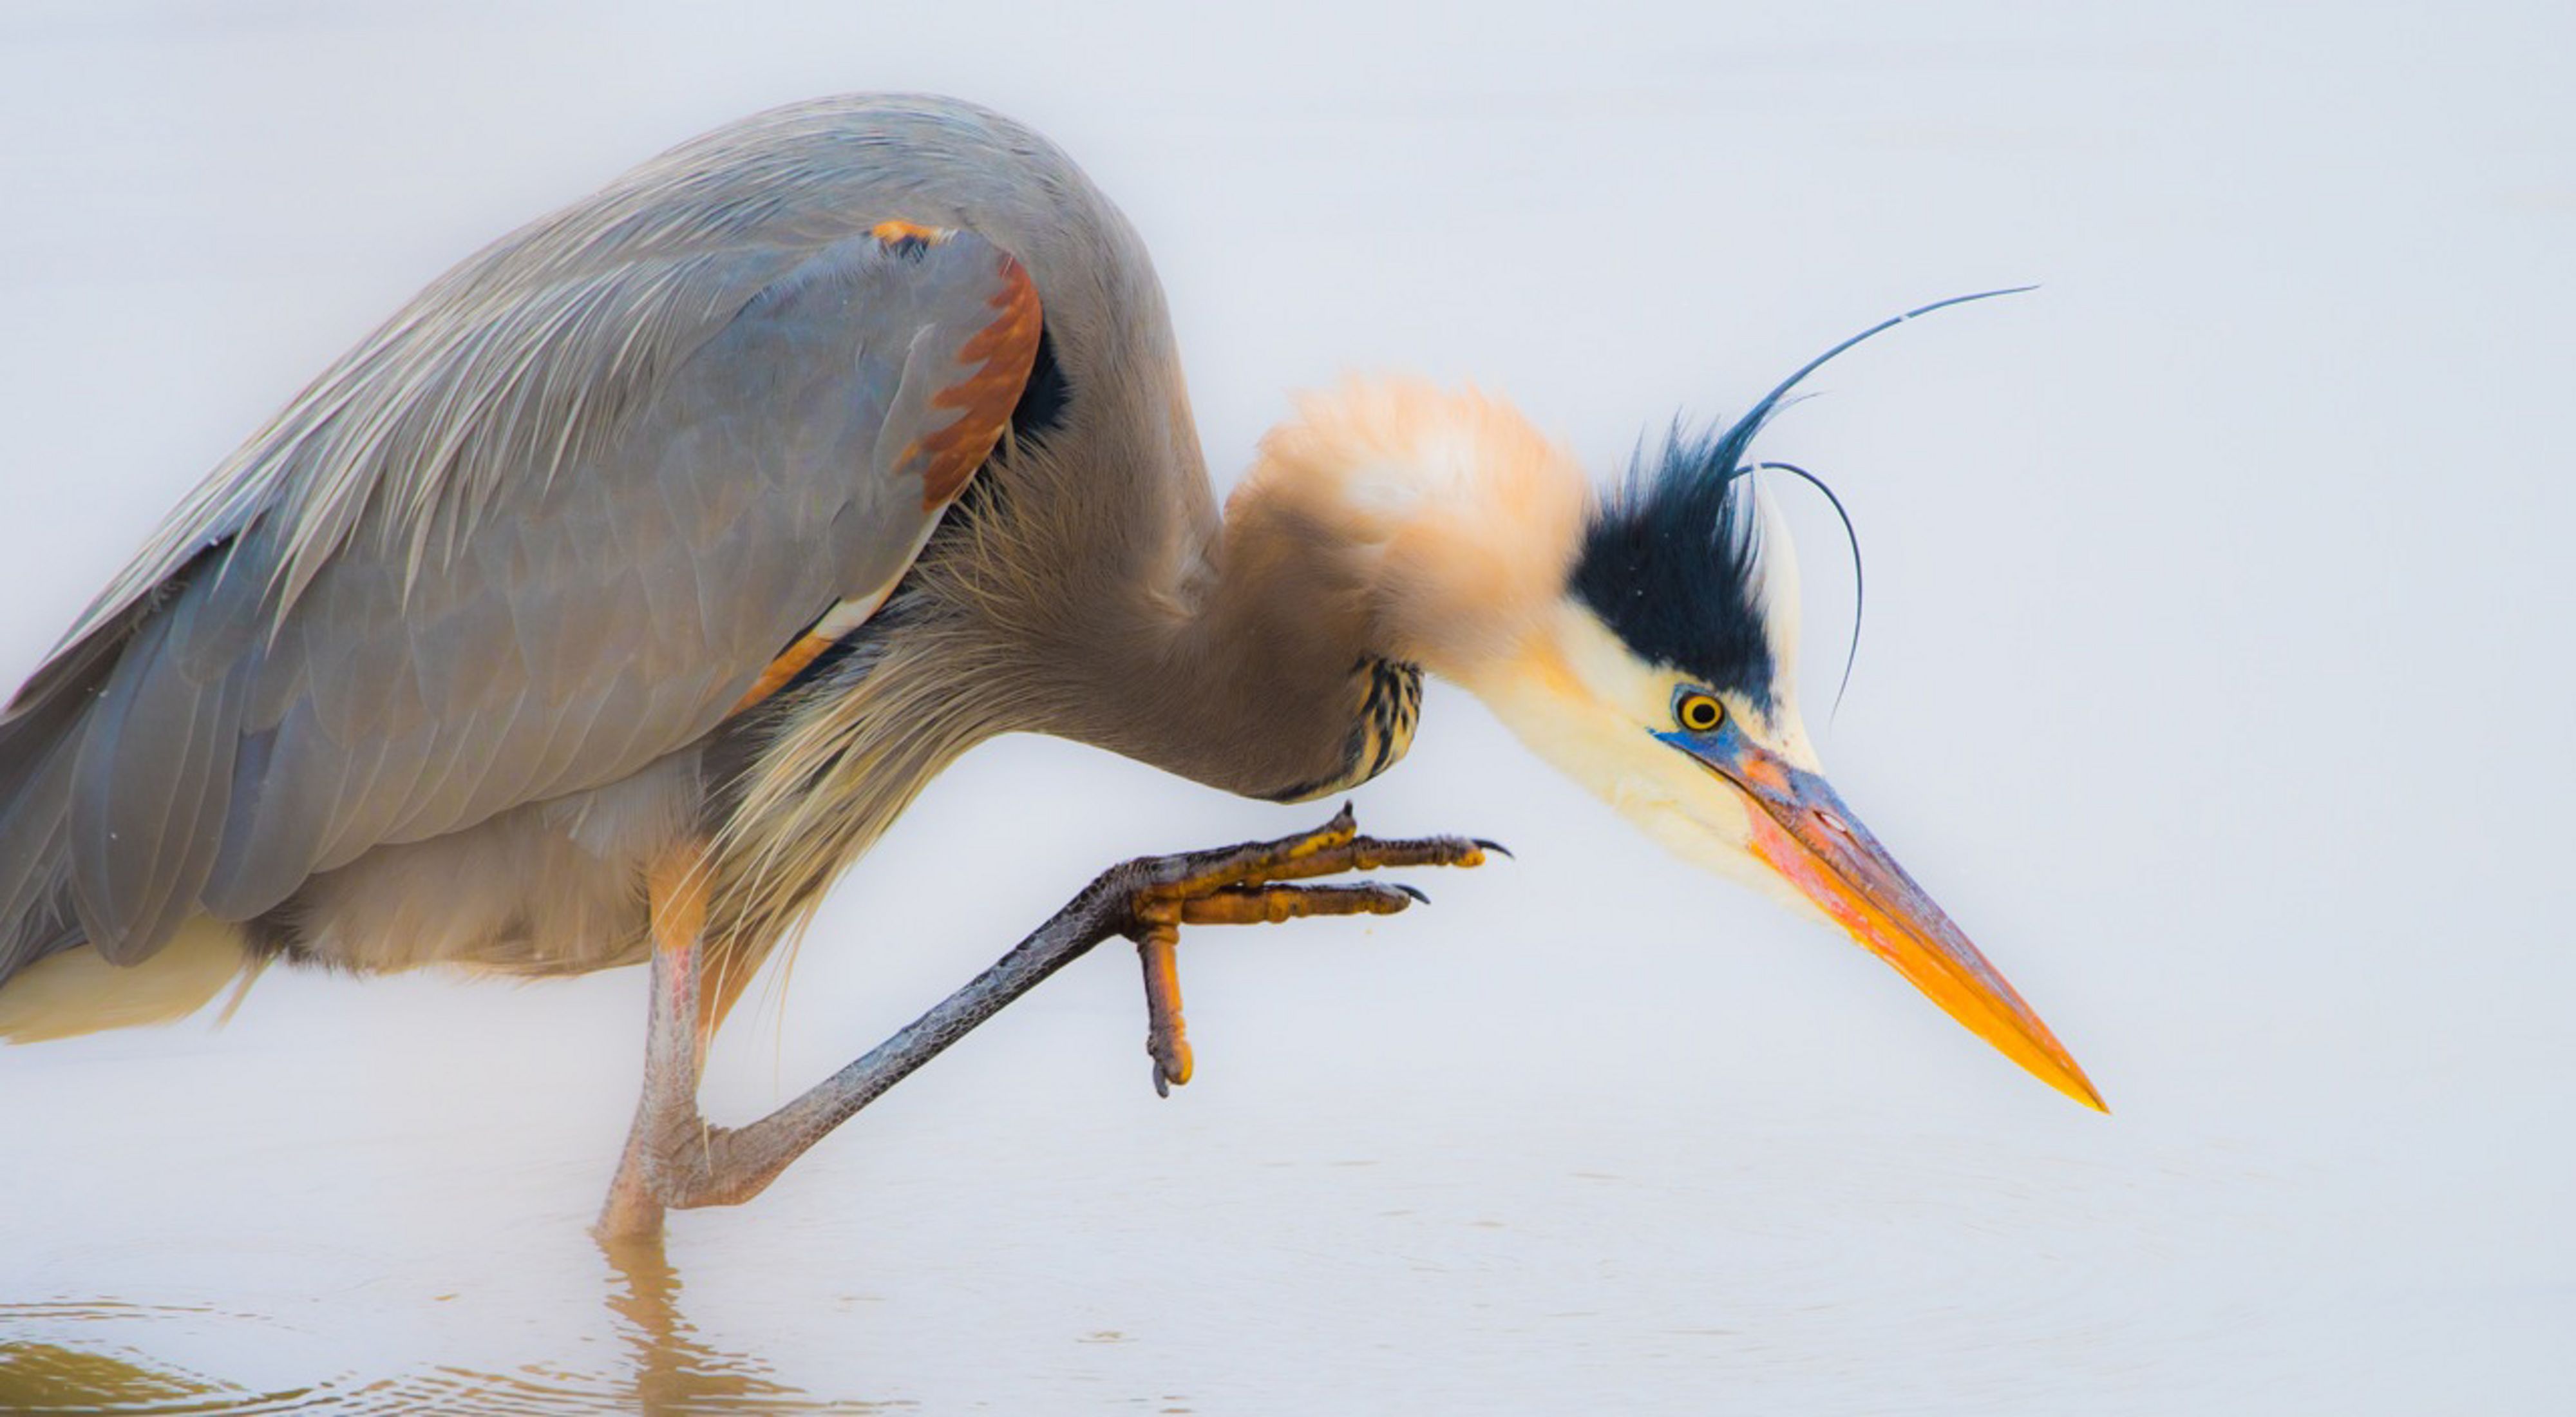 A Great Blue Heron in water.